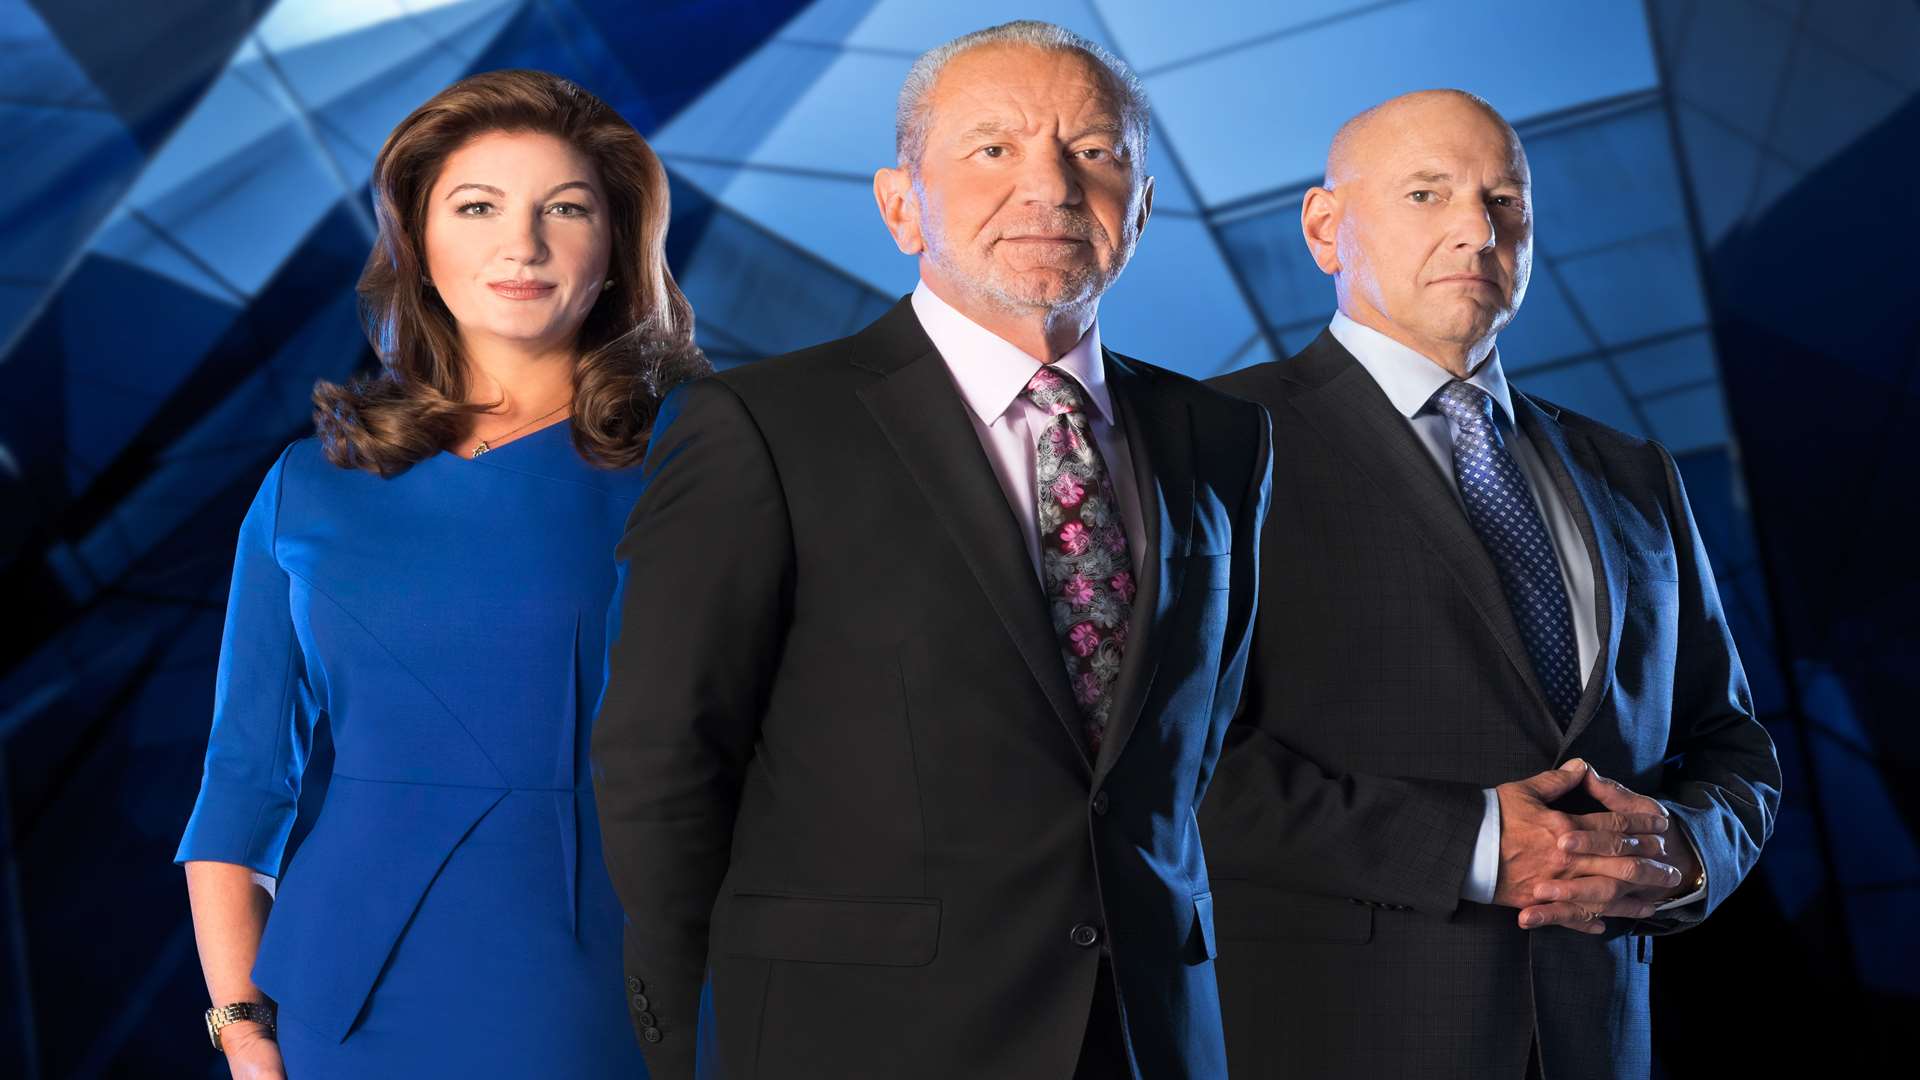 Kent was the star of last night's The Apprentice